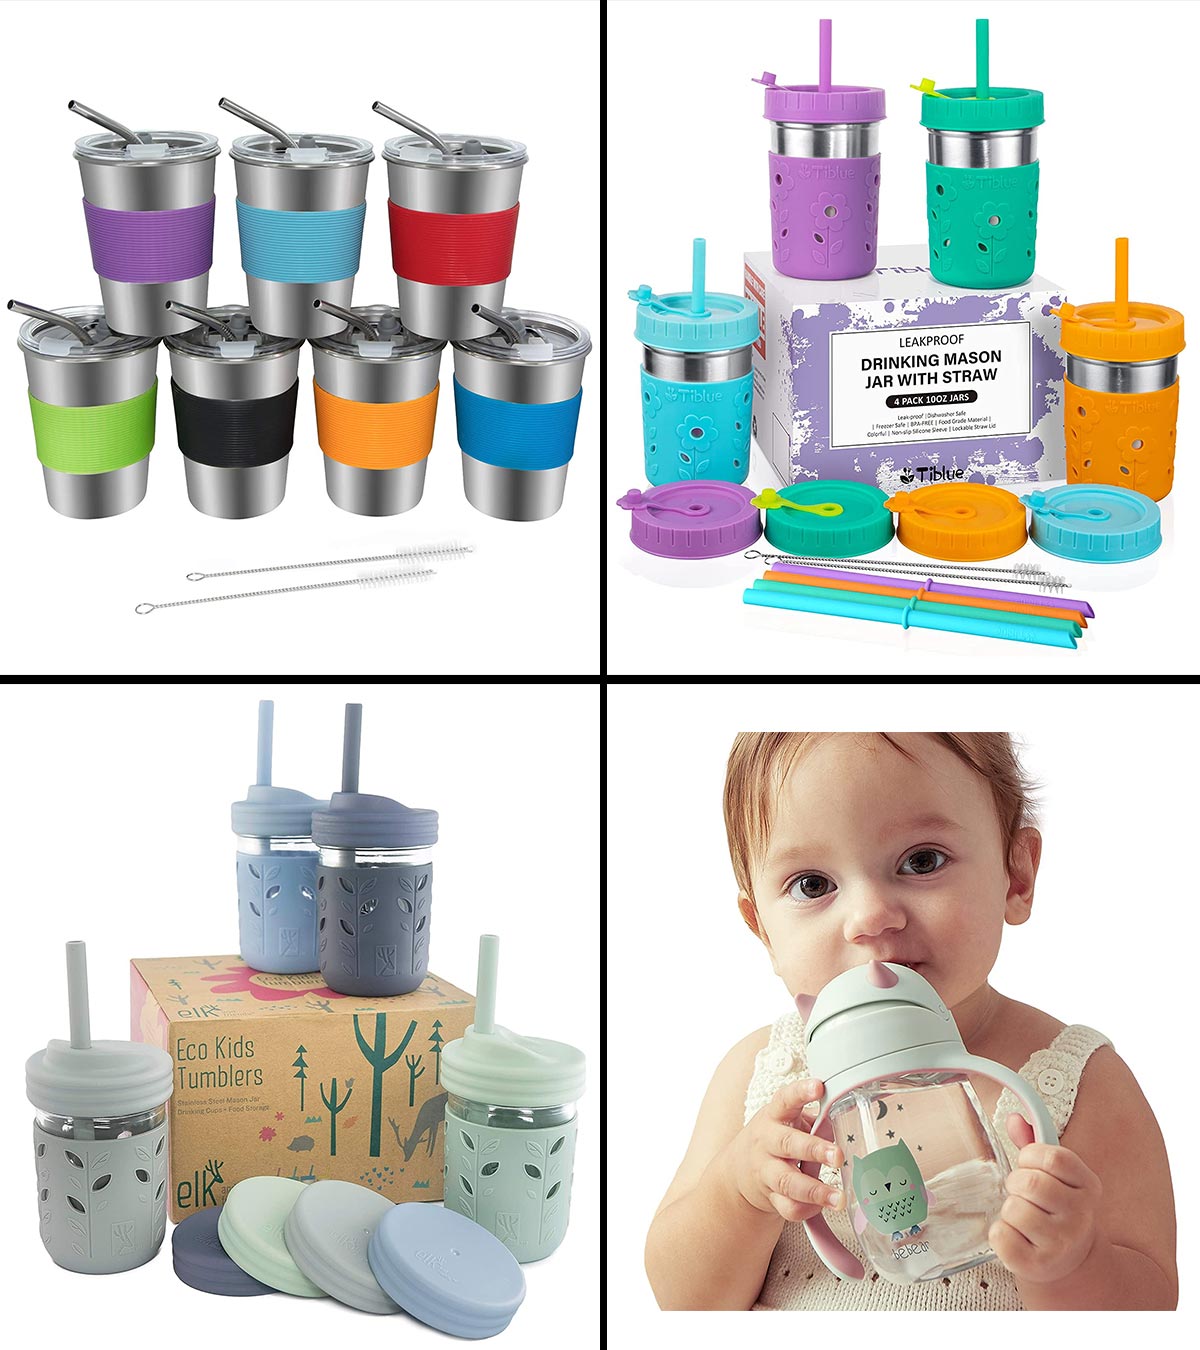 Lollaland Weighted Straw Sippy Cup Lollacup Best Sippy Cups for Baby Infant & Toddler Ages Bottle Transition Cups w/ Straws Sippy Cups for Toddlers Shark Tank Products 